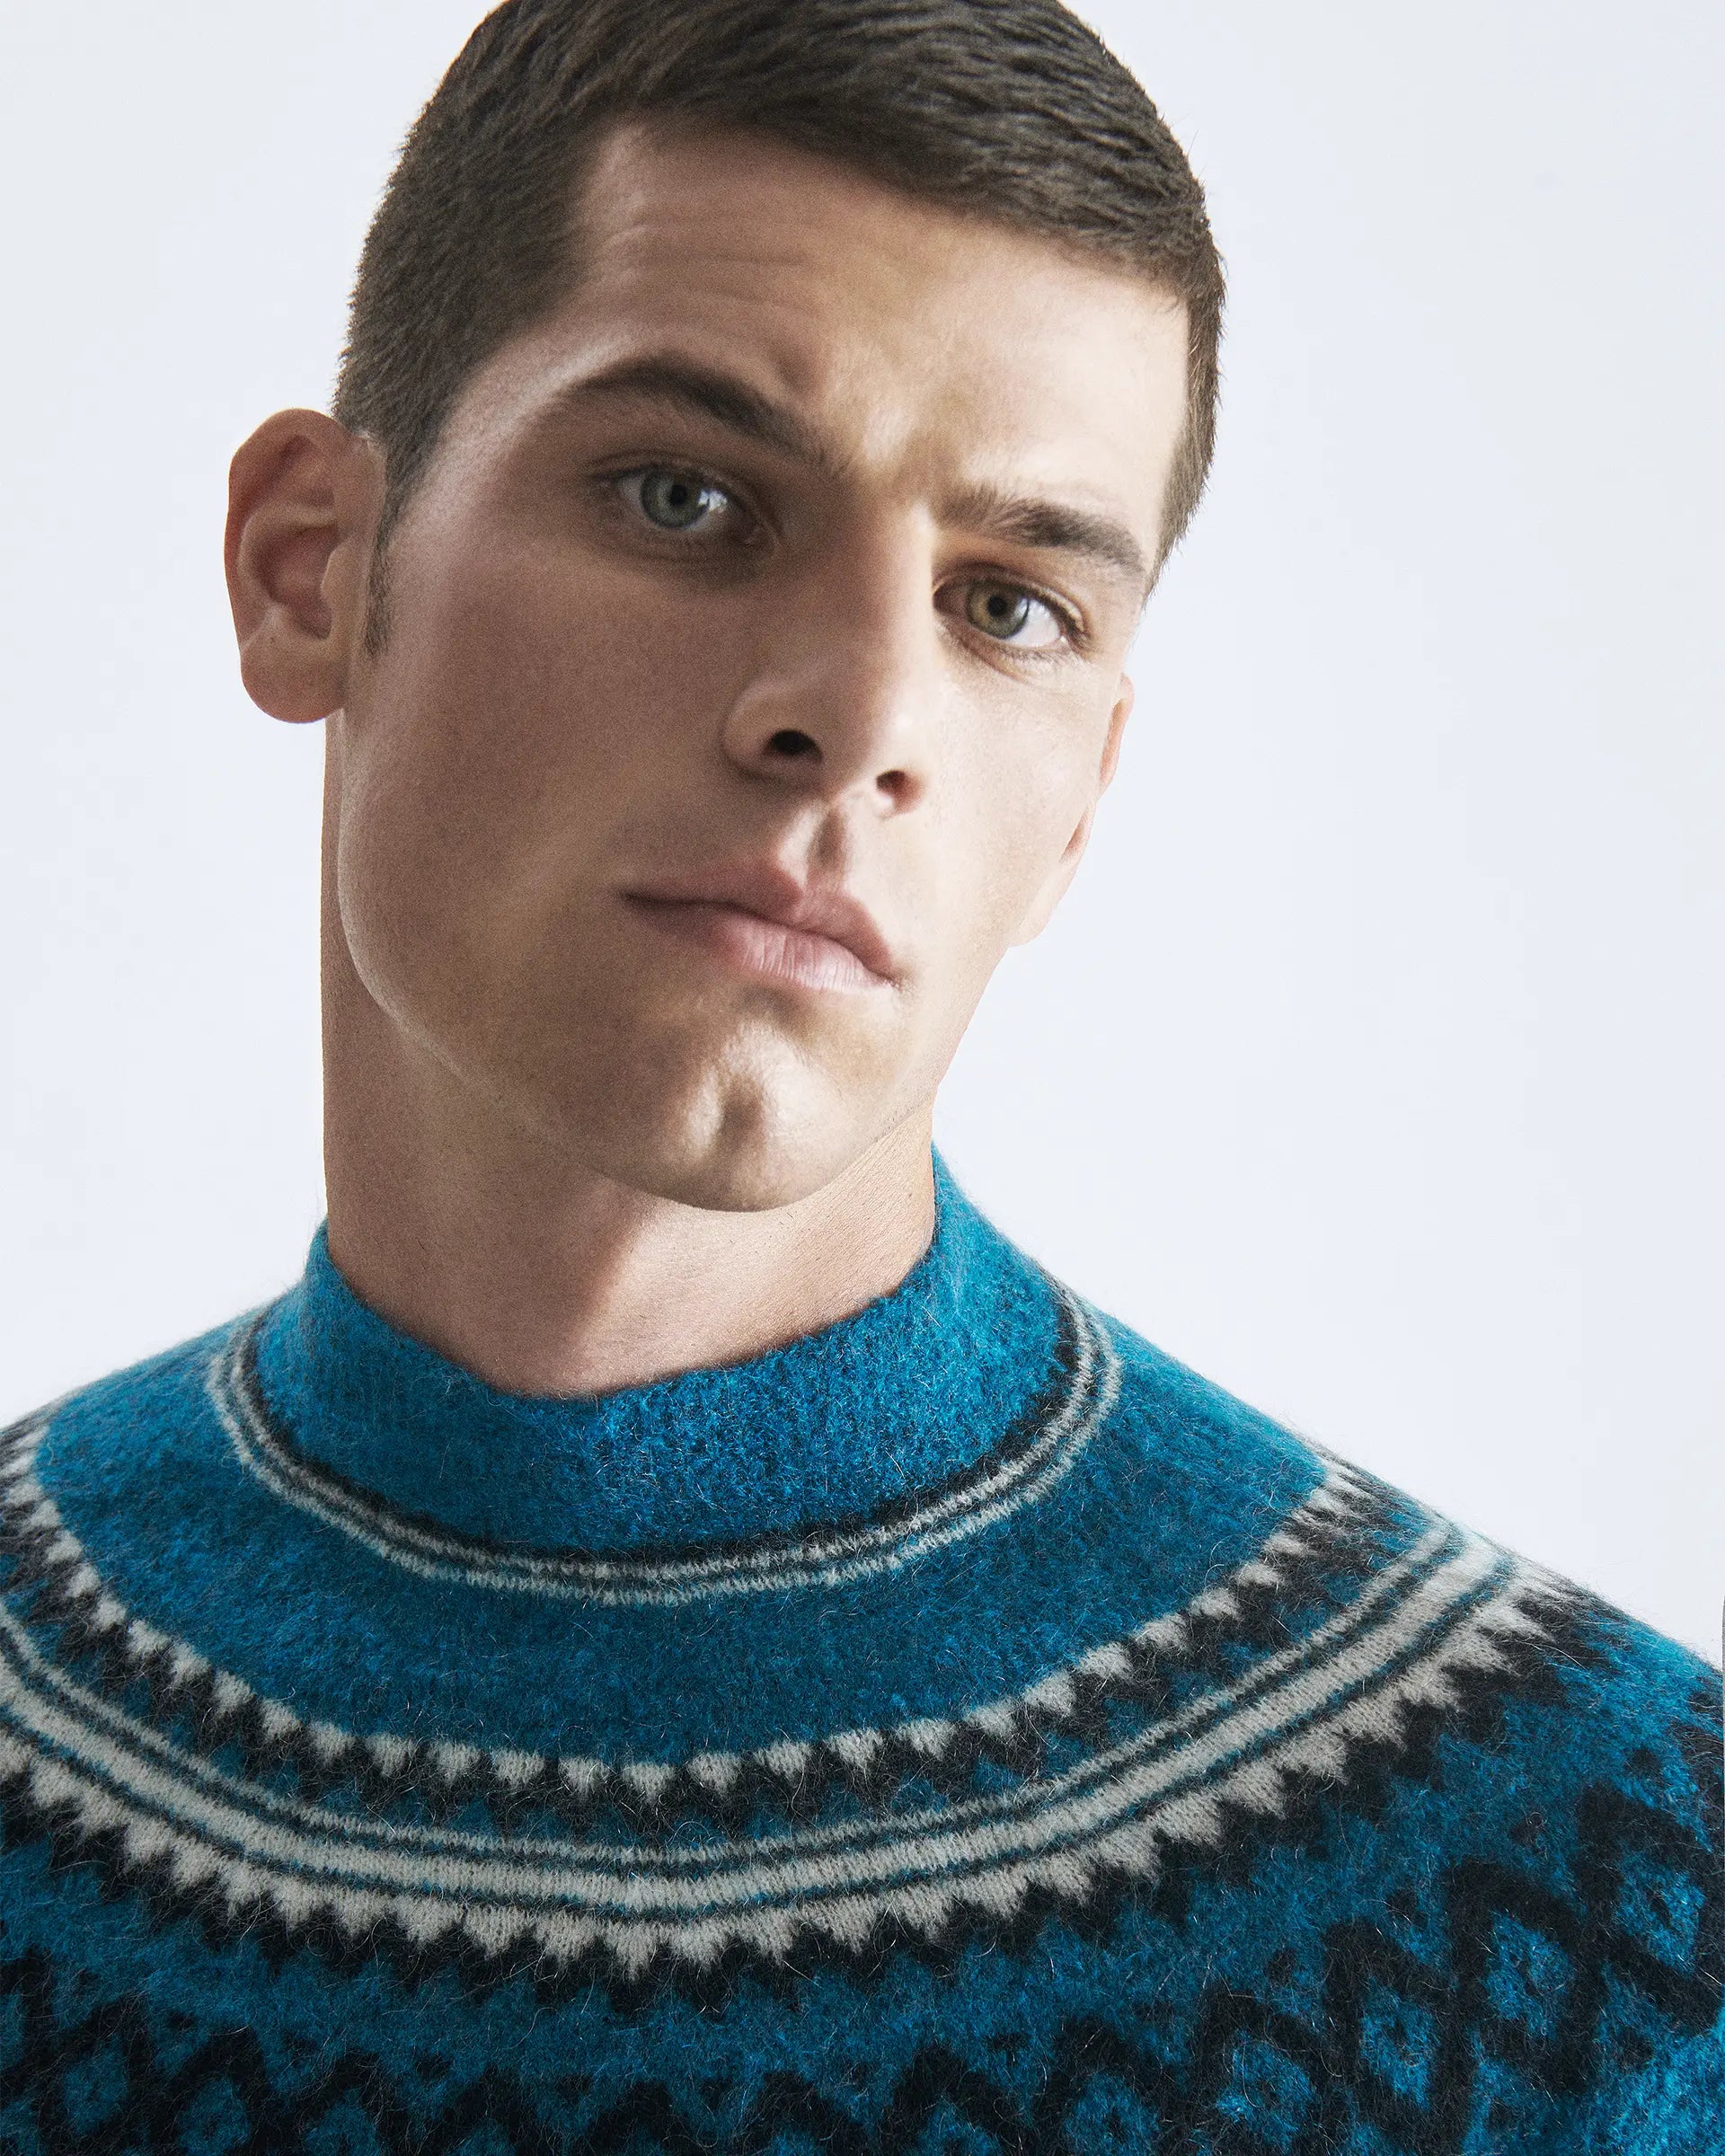 Blue patterned crewneck in wool and mohair, gauge 7